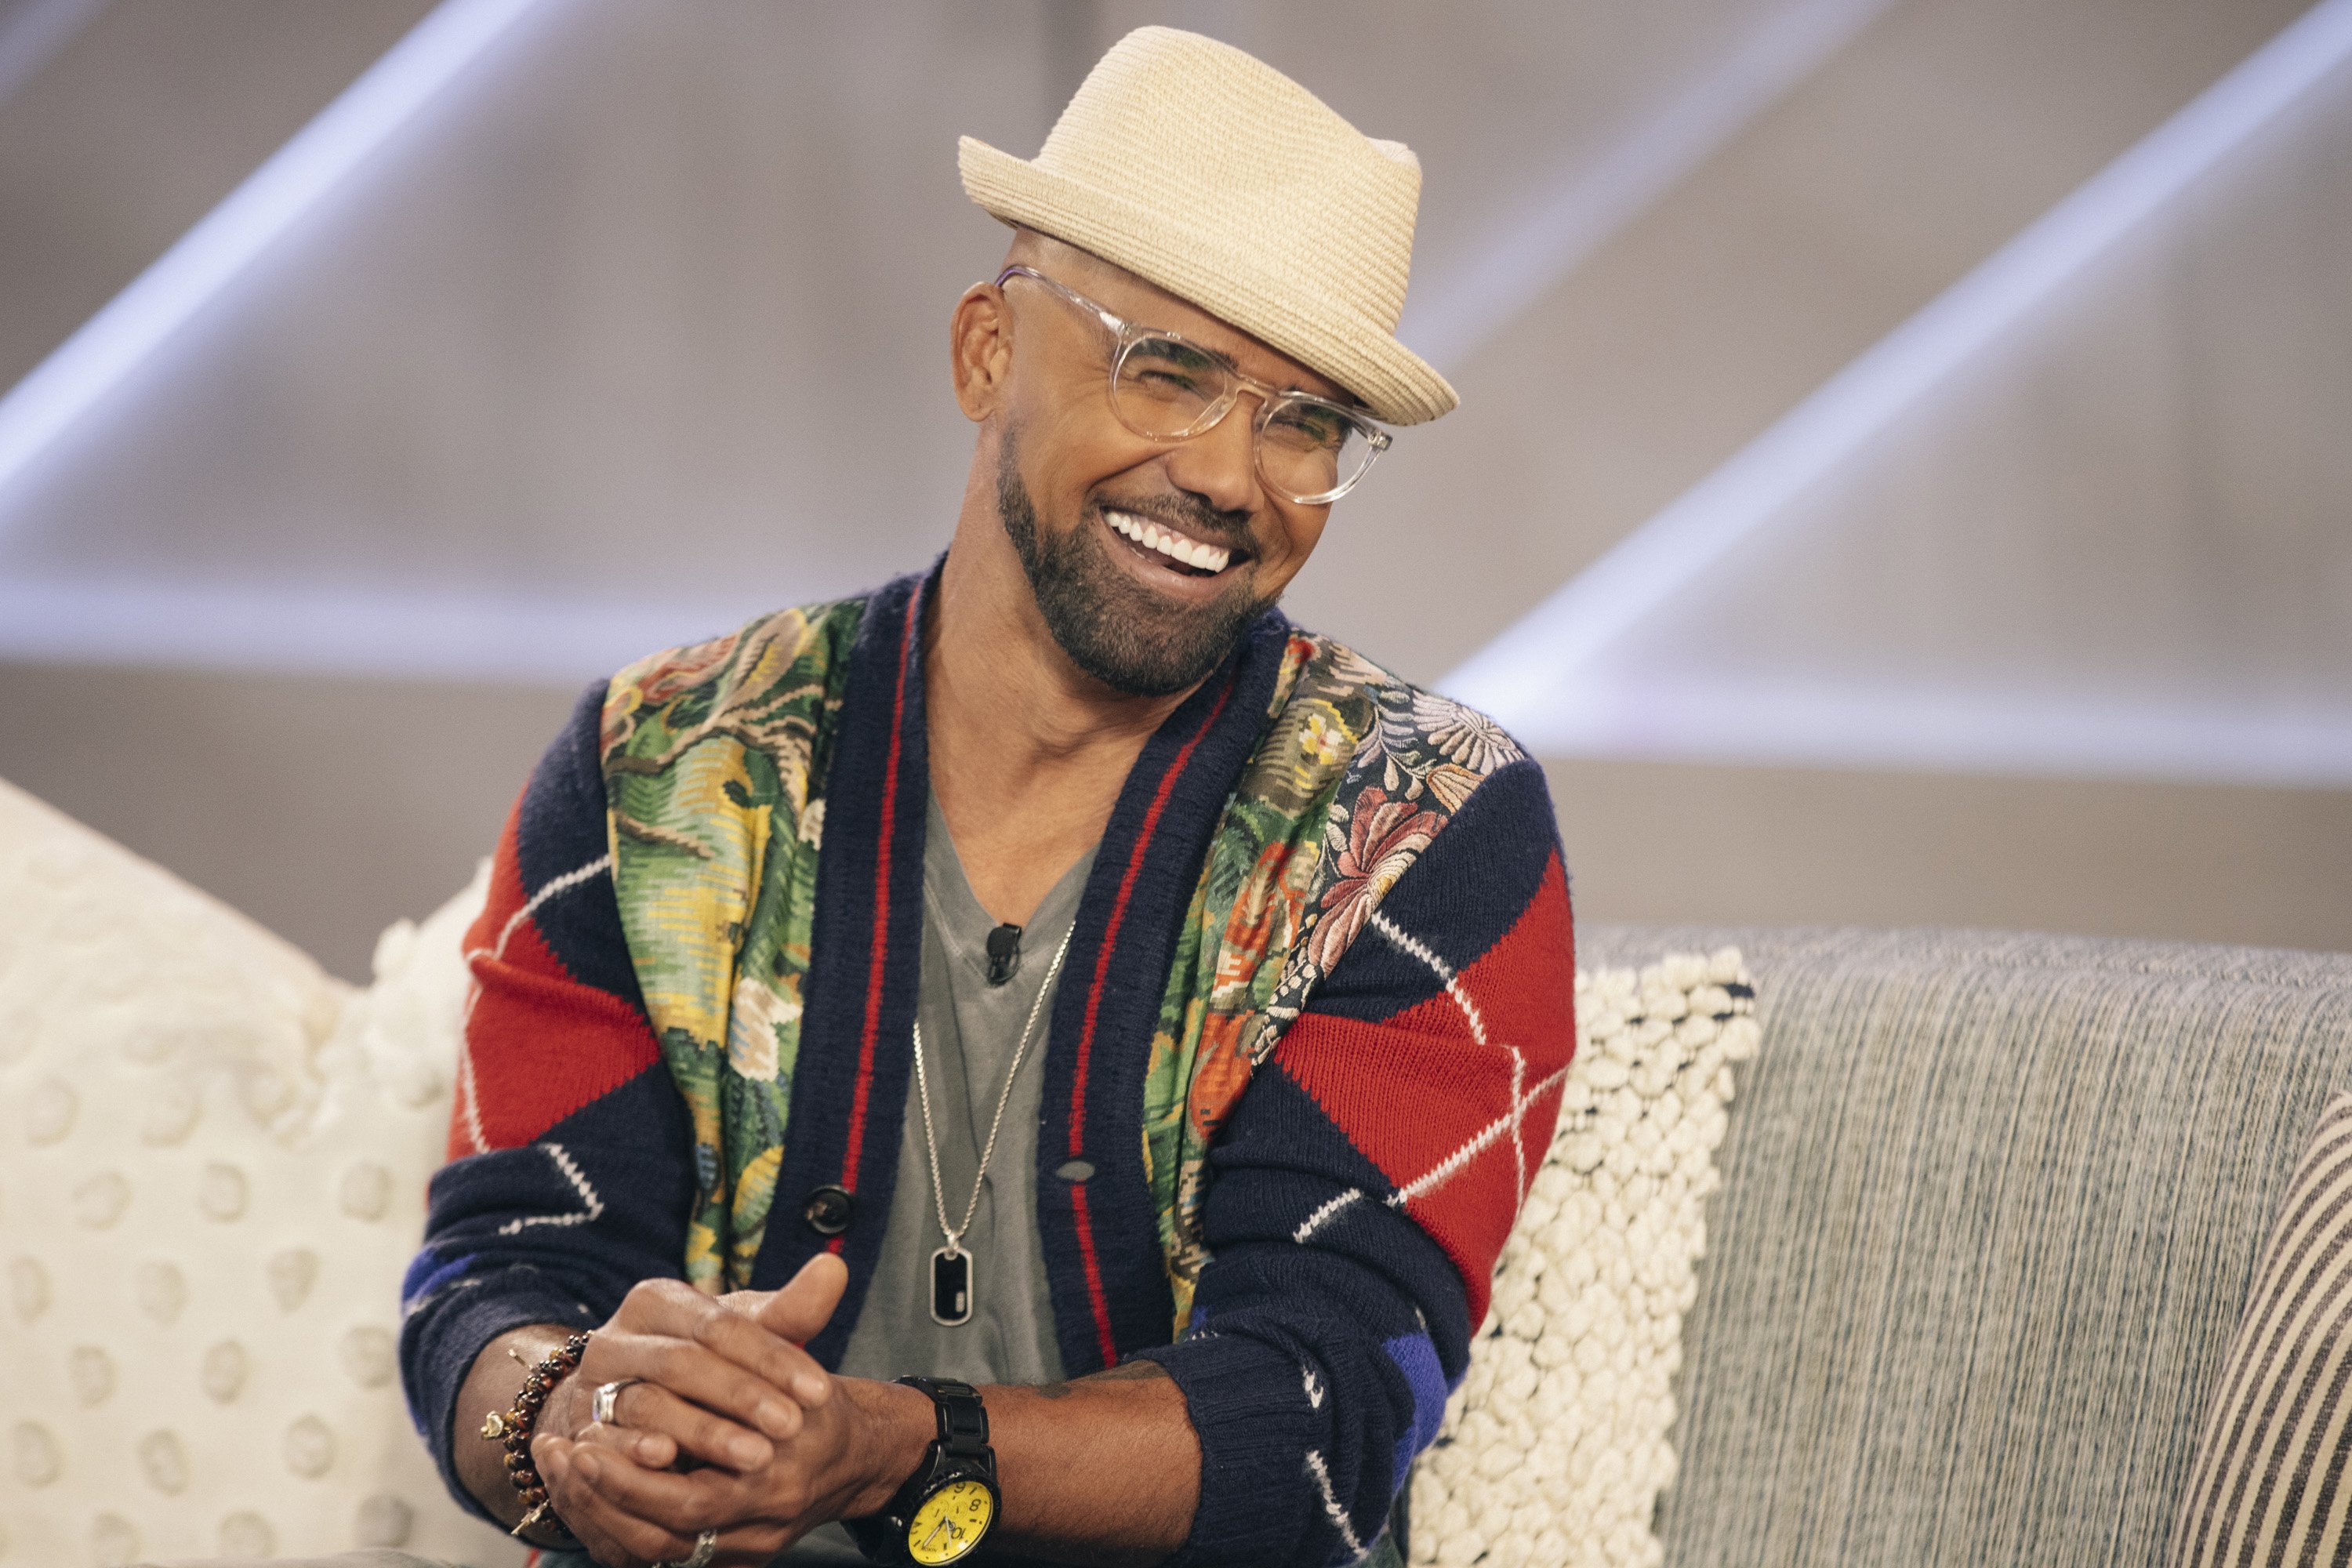 Shemar Moore on season 3 of "The Kelly Clarkson Show" on March 15, 2022 | Source: Getty Images